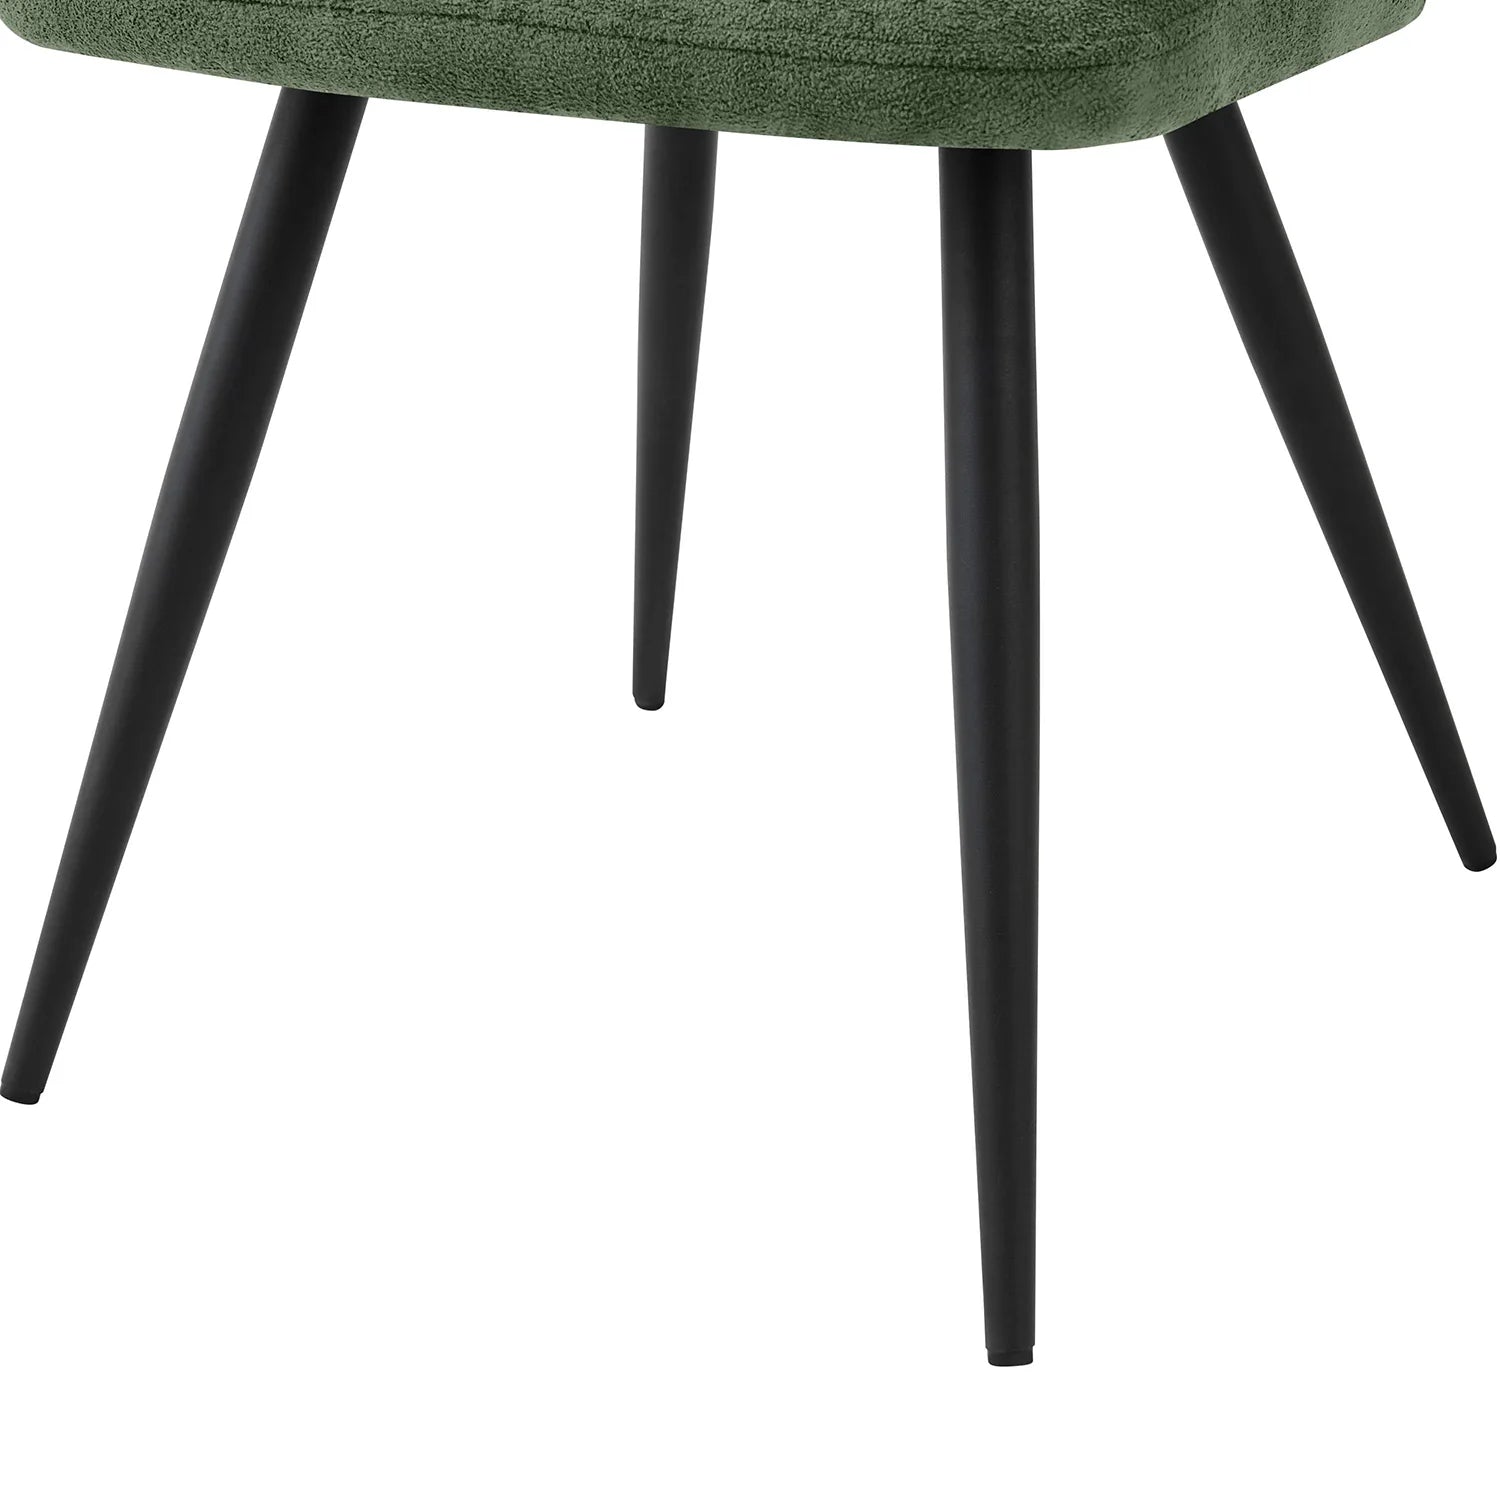 Corinth Linen Effect Green Dining Chairs - Set of 4